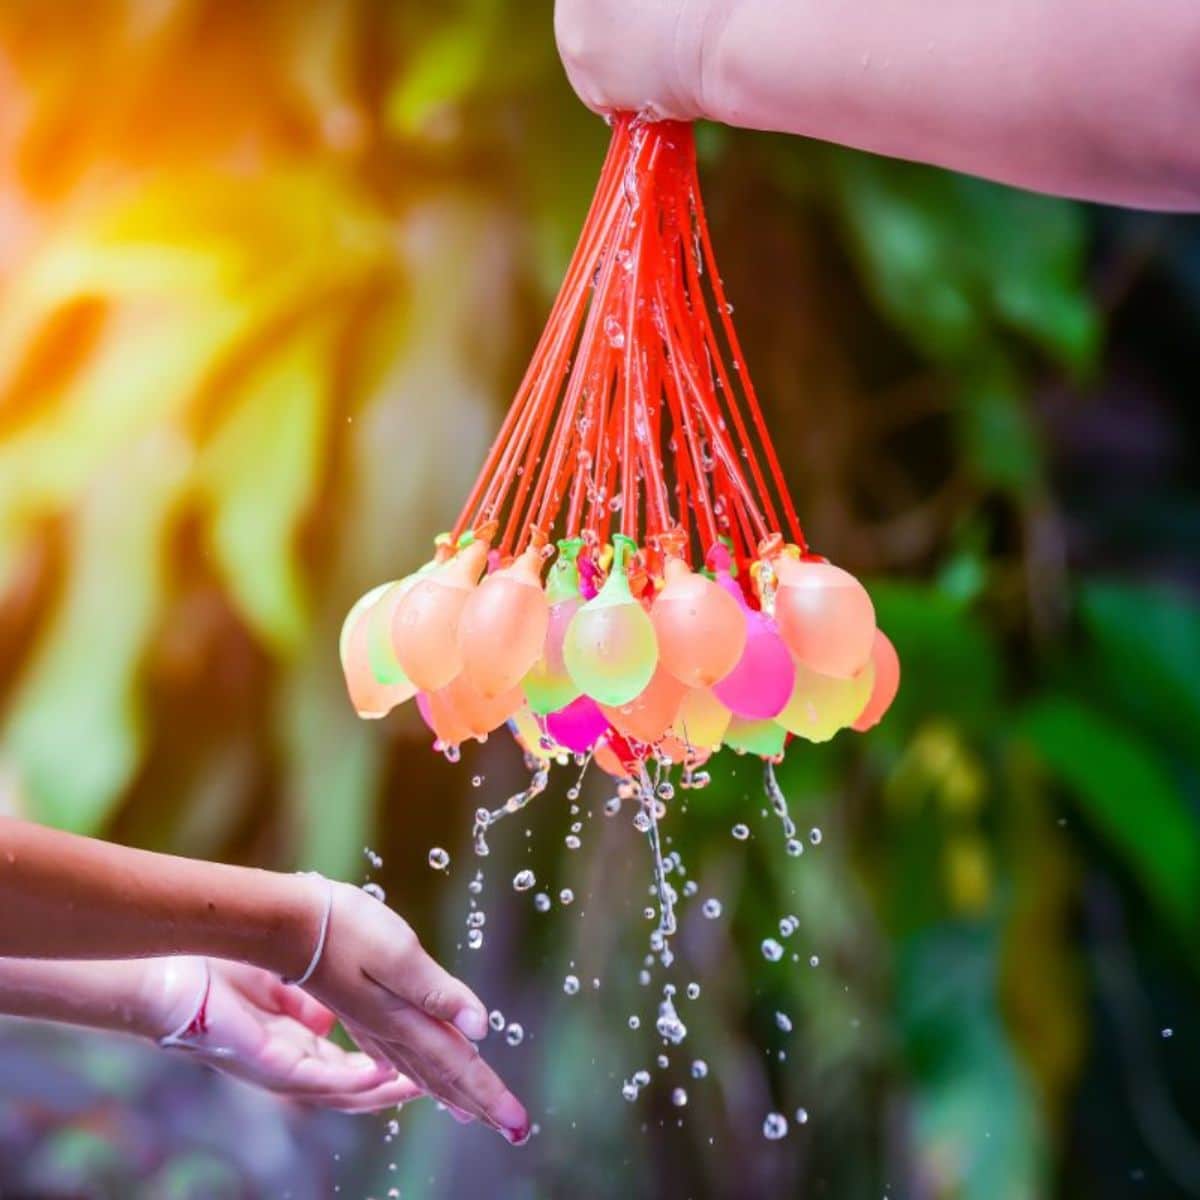 Hand holding bunch of water balloons over kid hands,